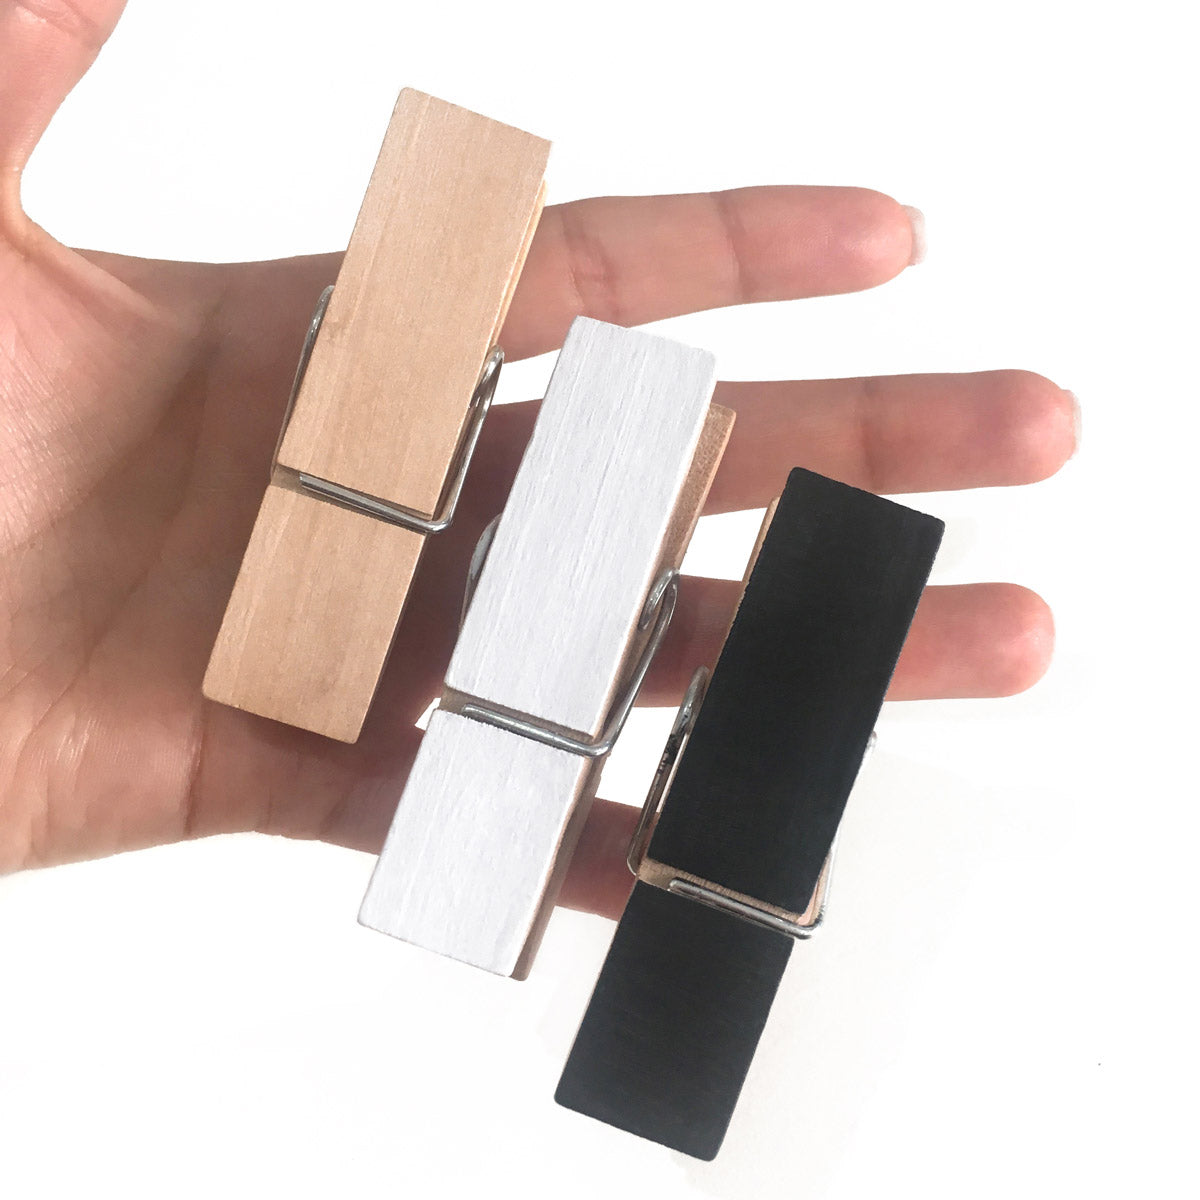 Pair of wood wall clips pegs, held in a hand 